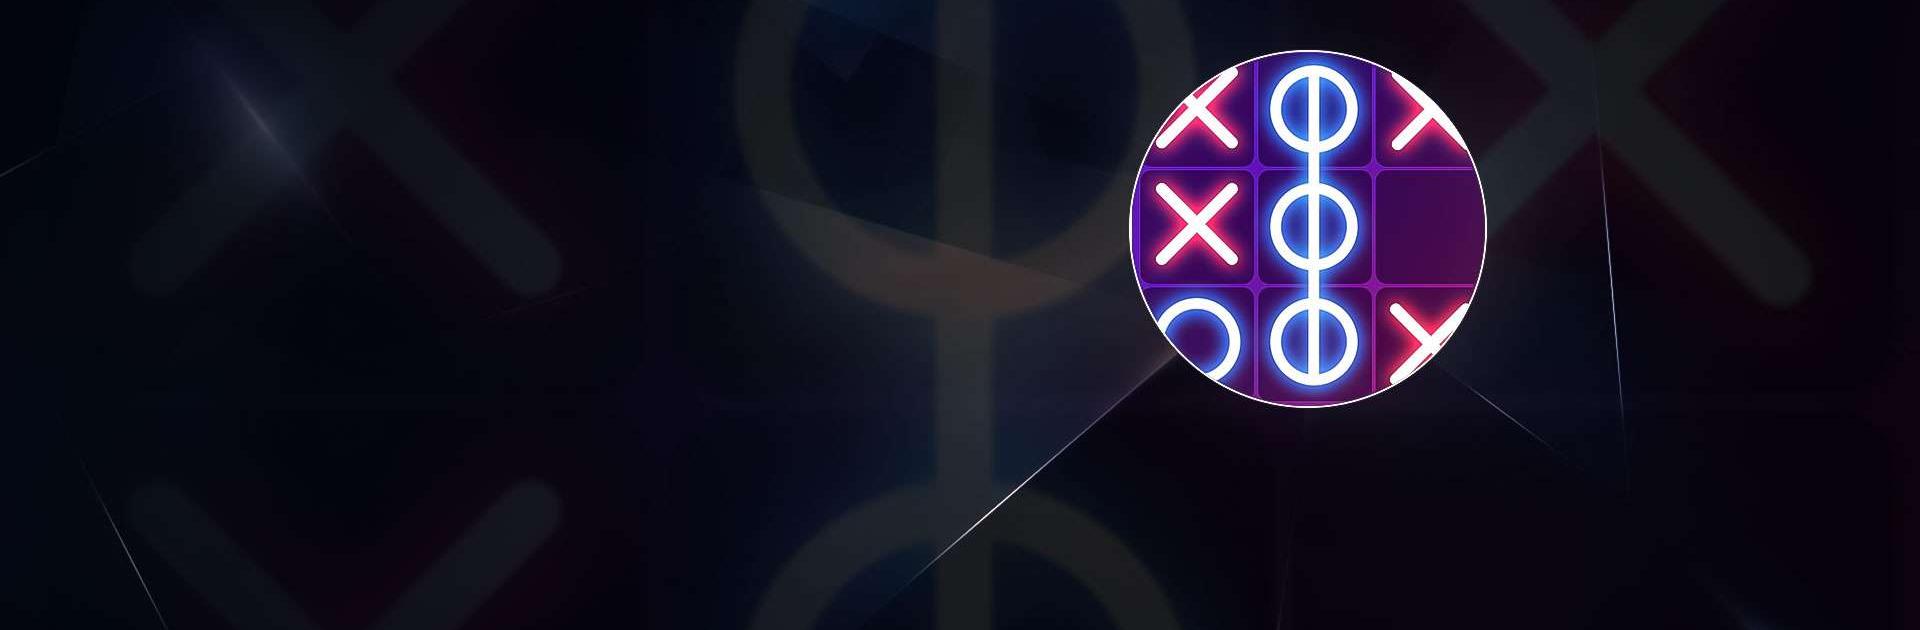 Tic Tac Toe Neon: XO Game - Apps on Google Play